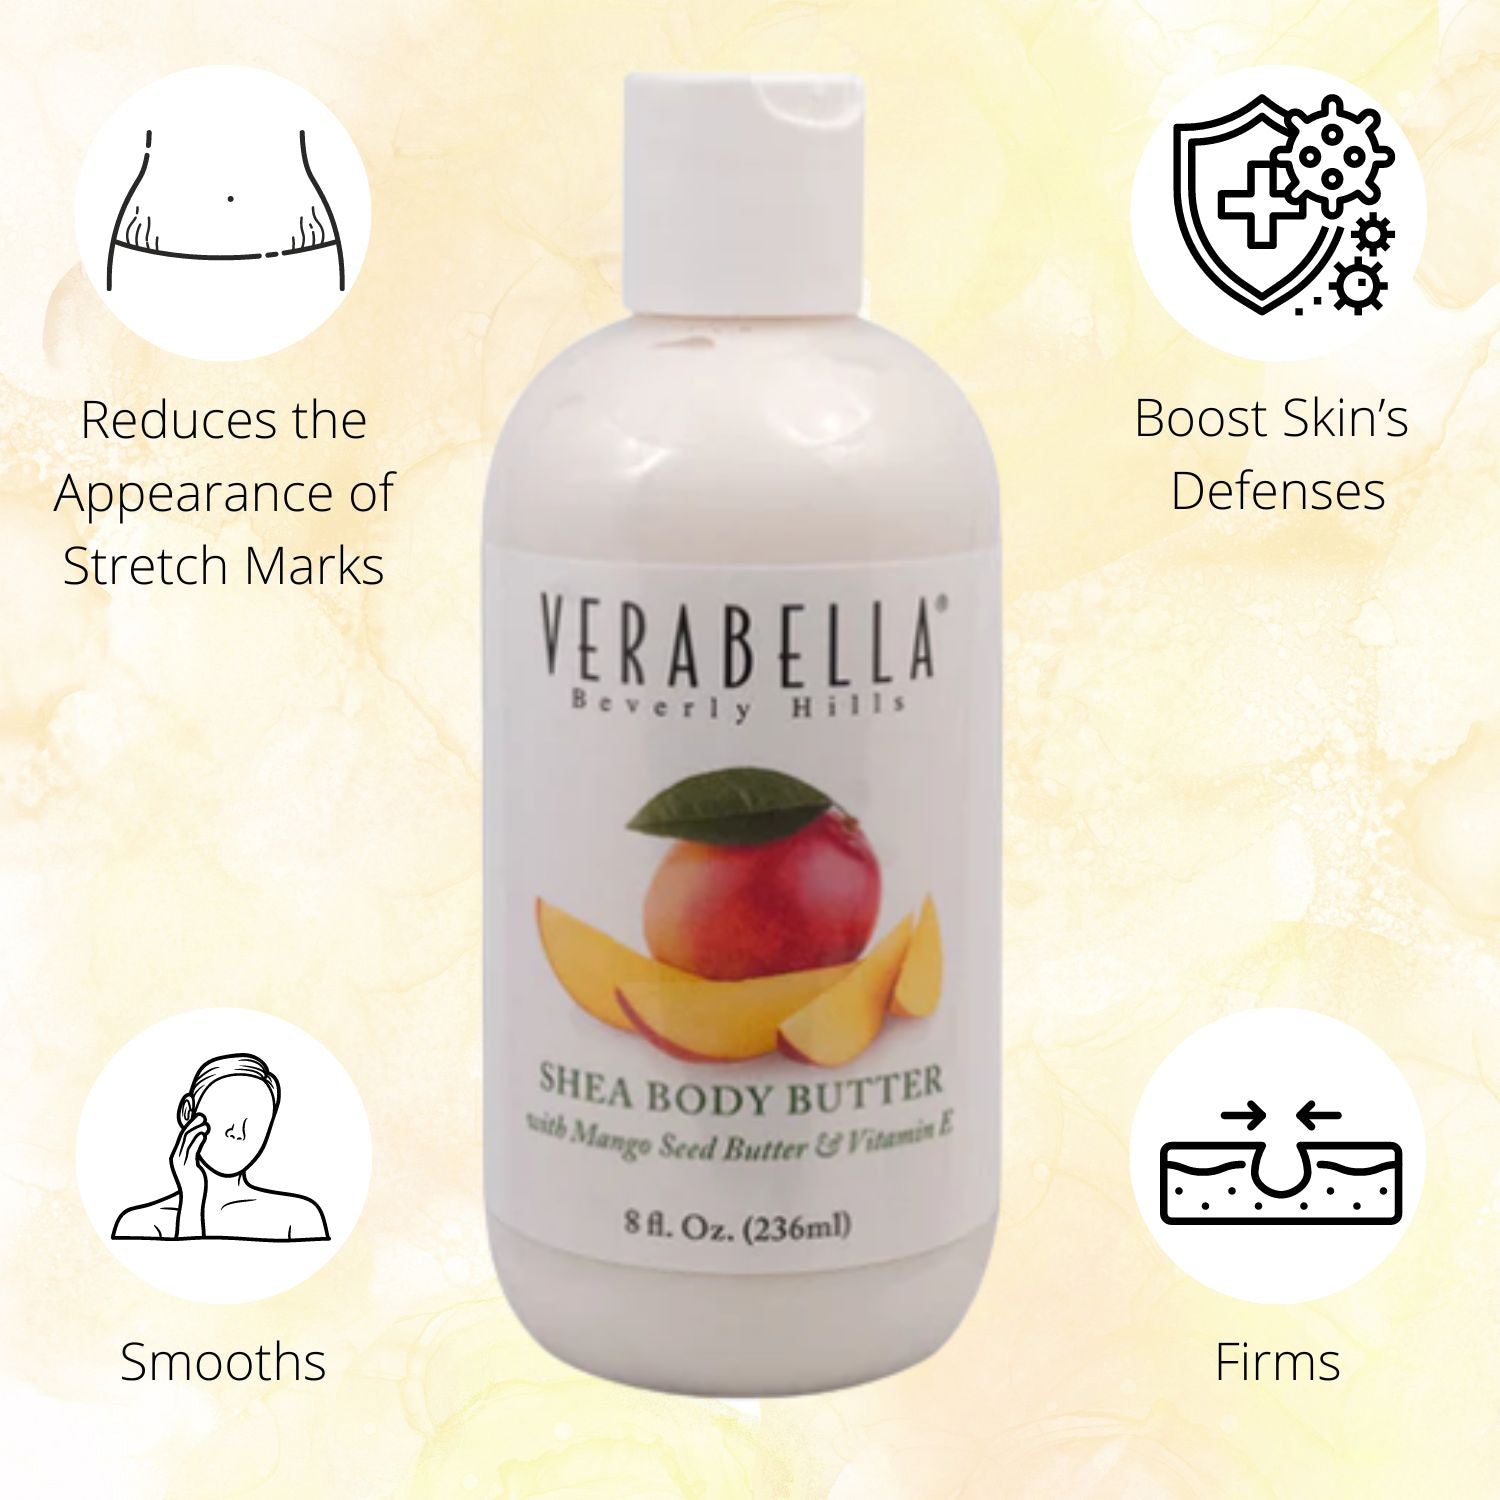 Verabella Shea Body Butter reduces the appearance of stretch marks